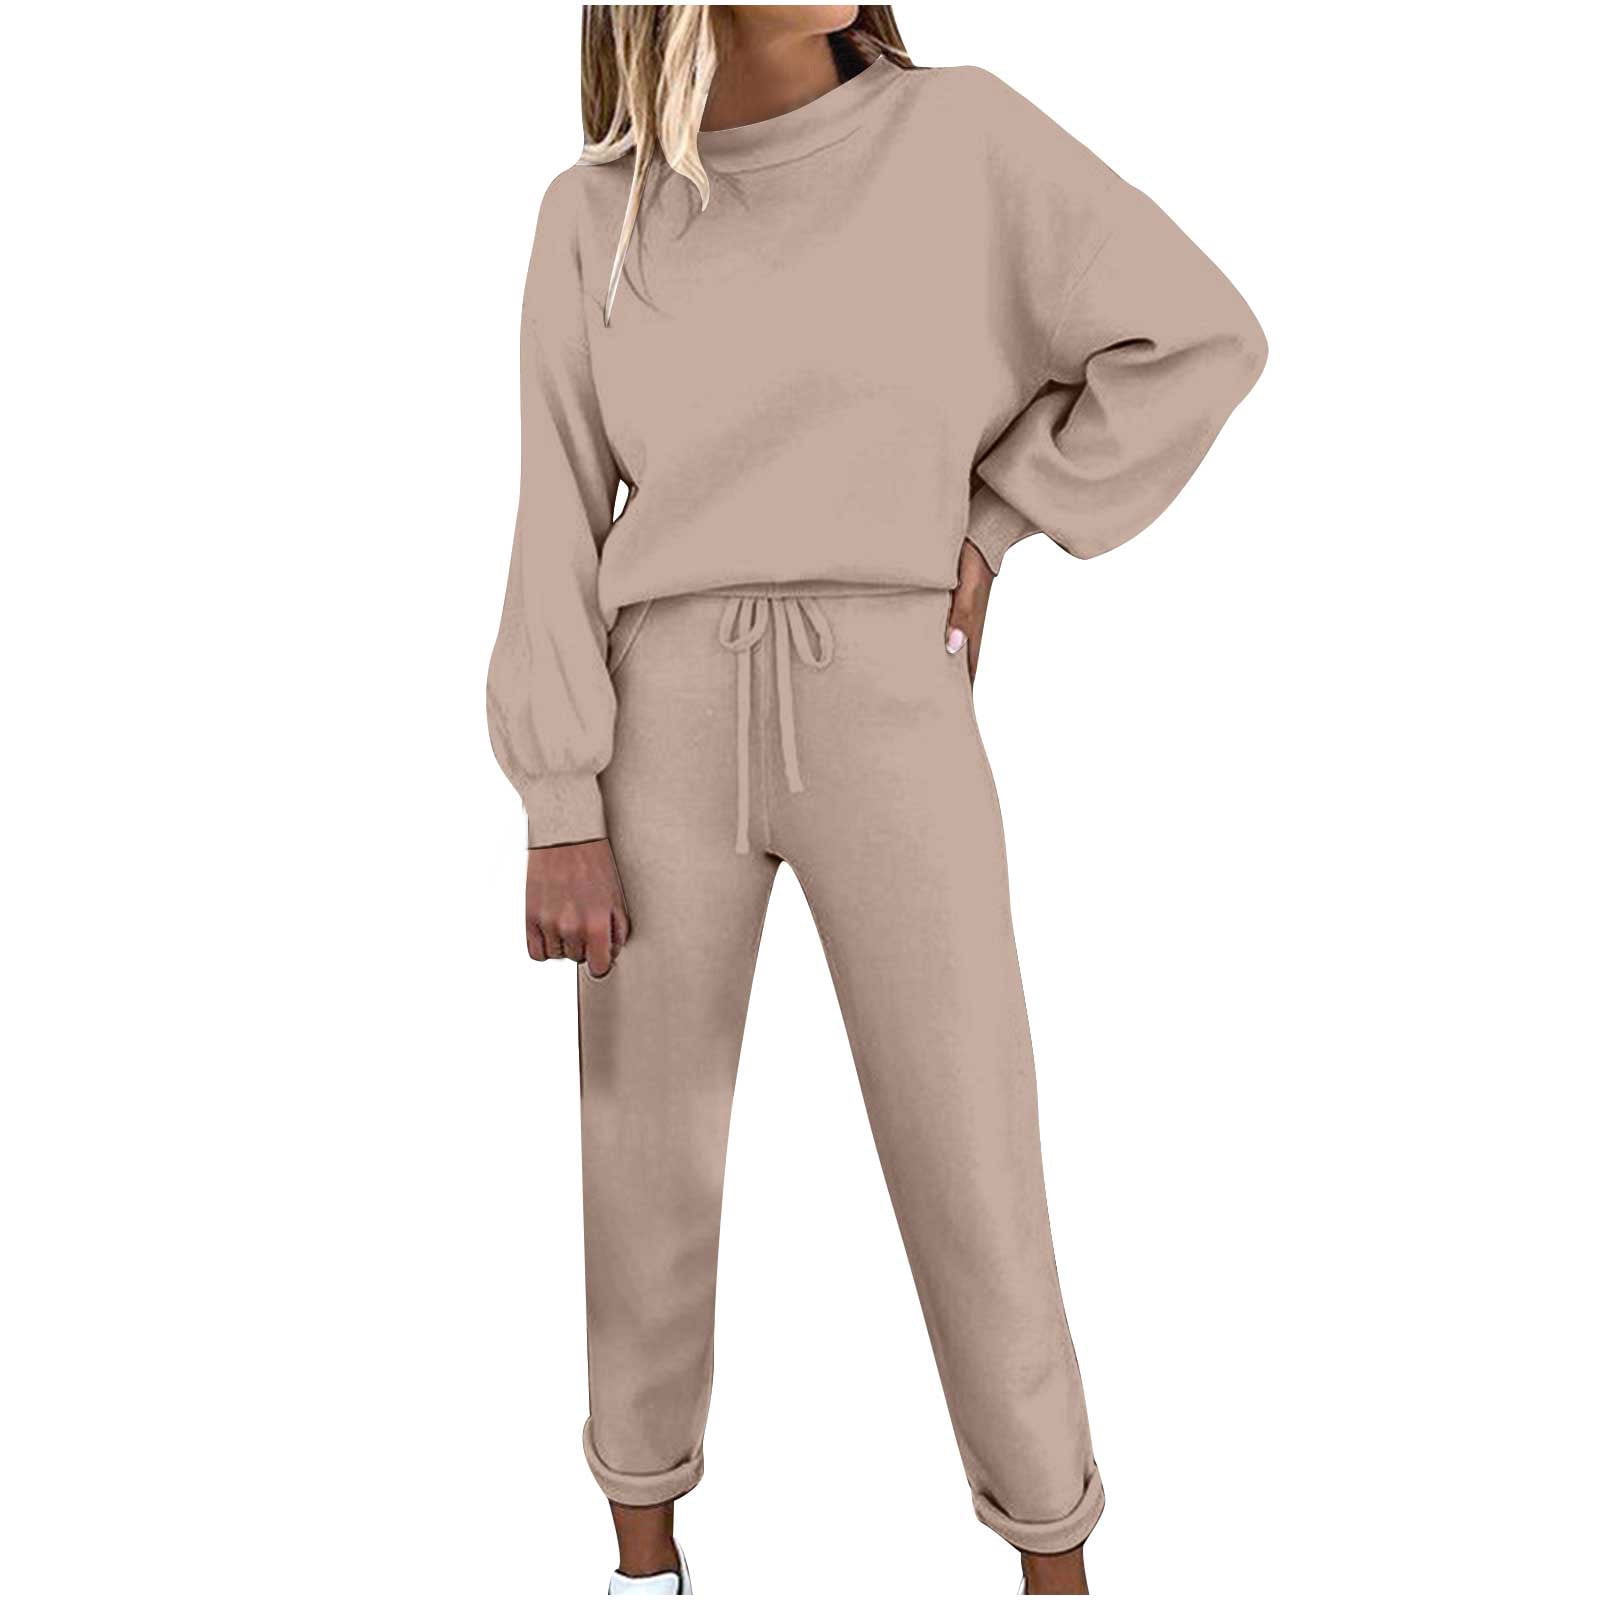 AOOCHASLIY Sweat Suits for Women Clearance Jogging Suits Pullover